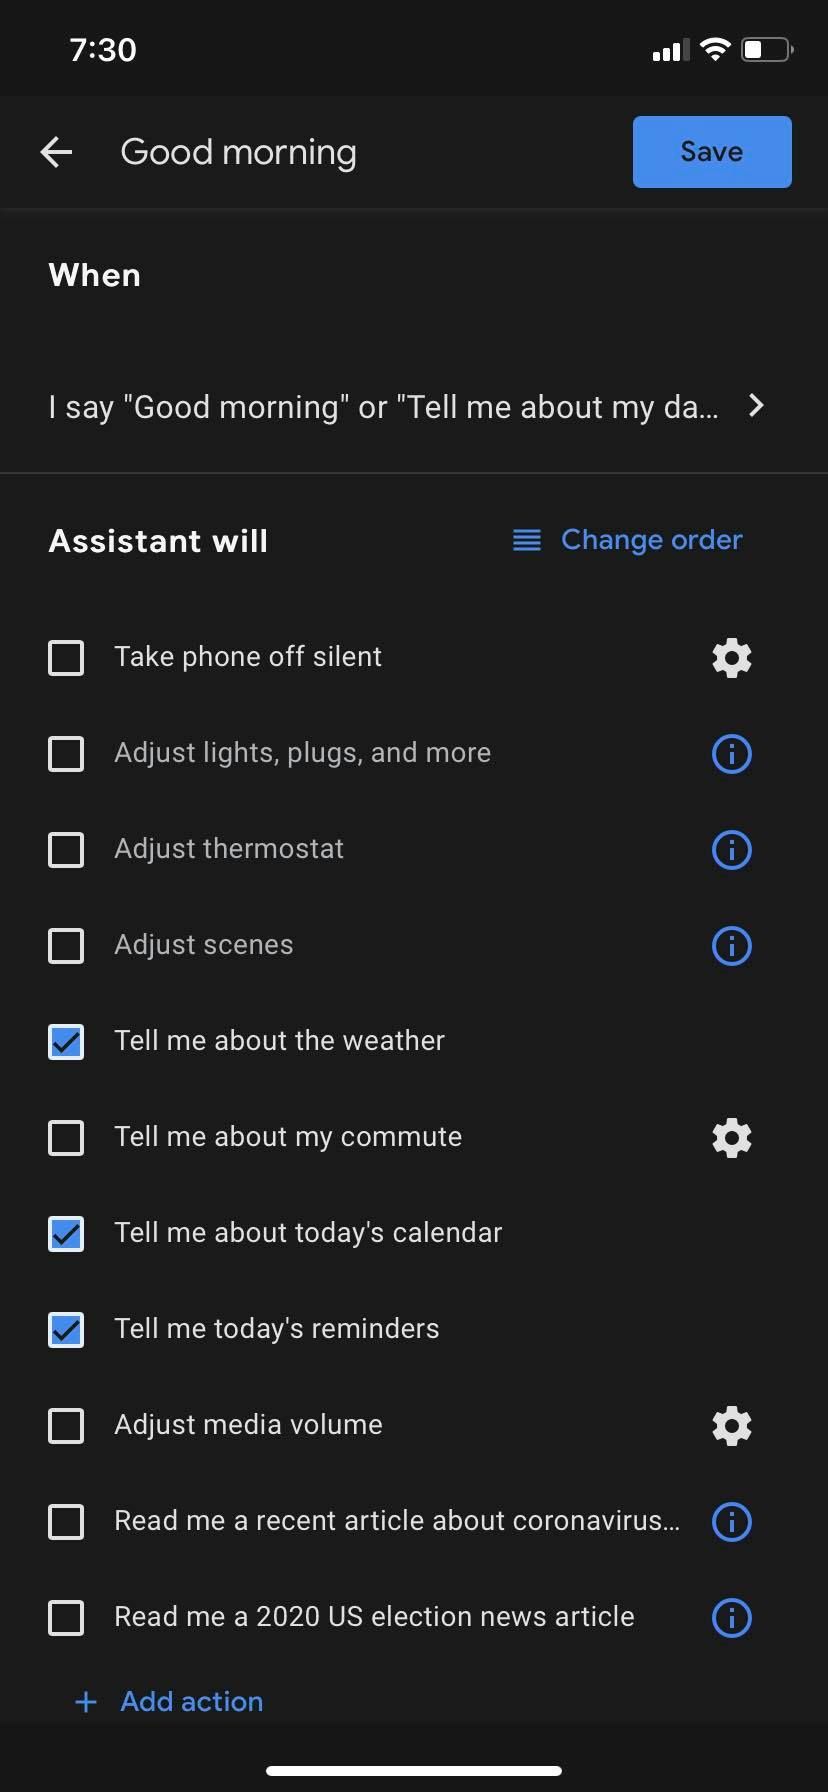 screenshot of Google Assistant good morning routine options